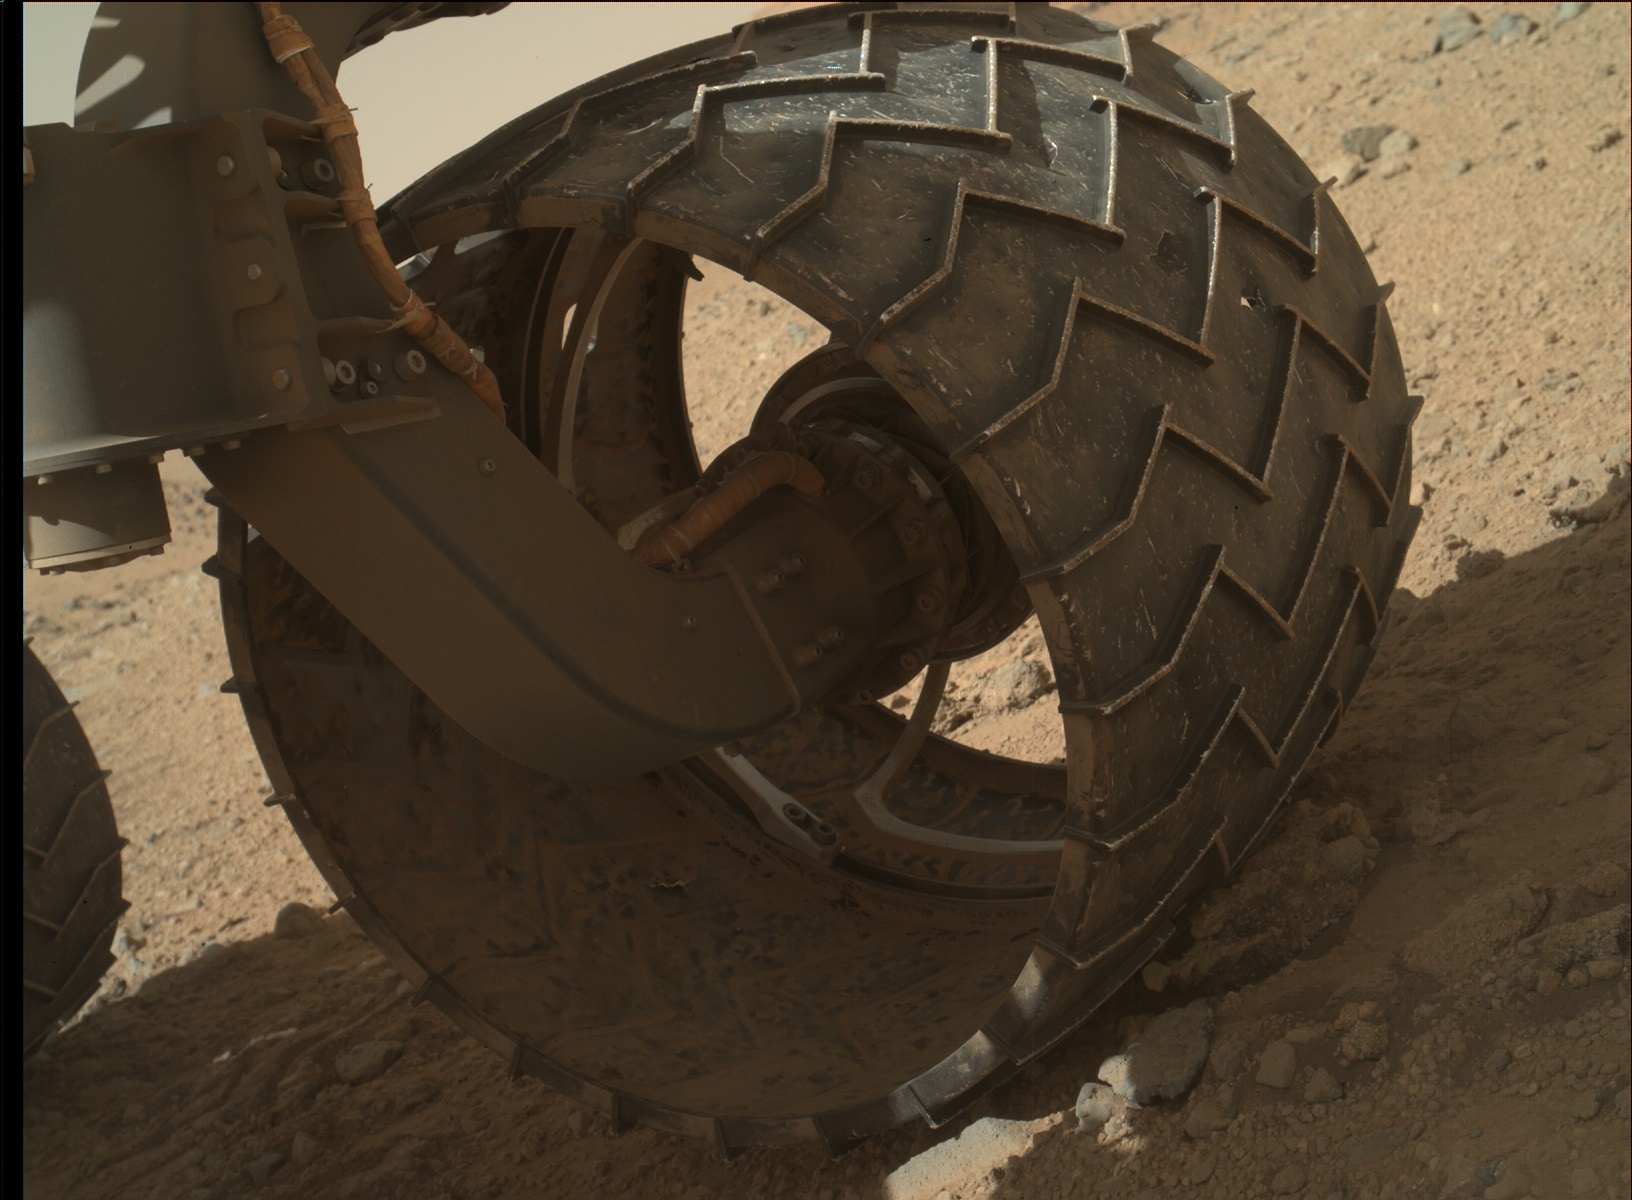 Nasa's Mars rover Curiosity acquired this image using its Mars Hand Lens Imager (MAHLI) on Sol 544